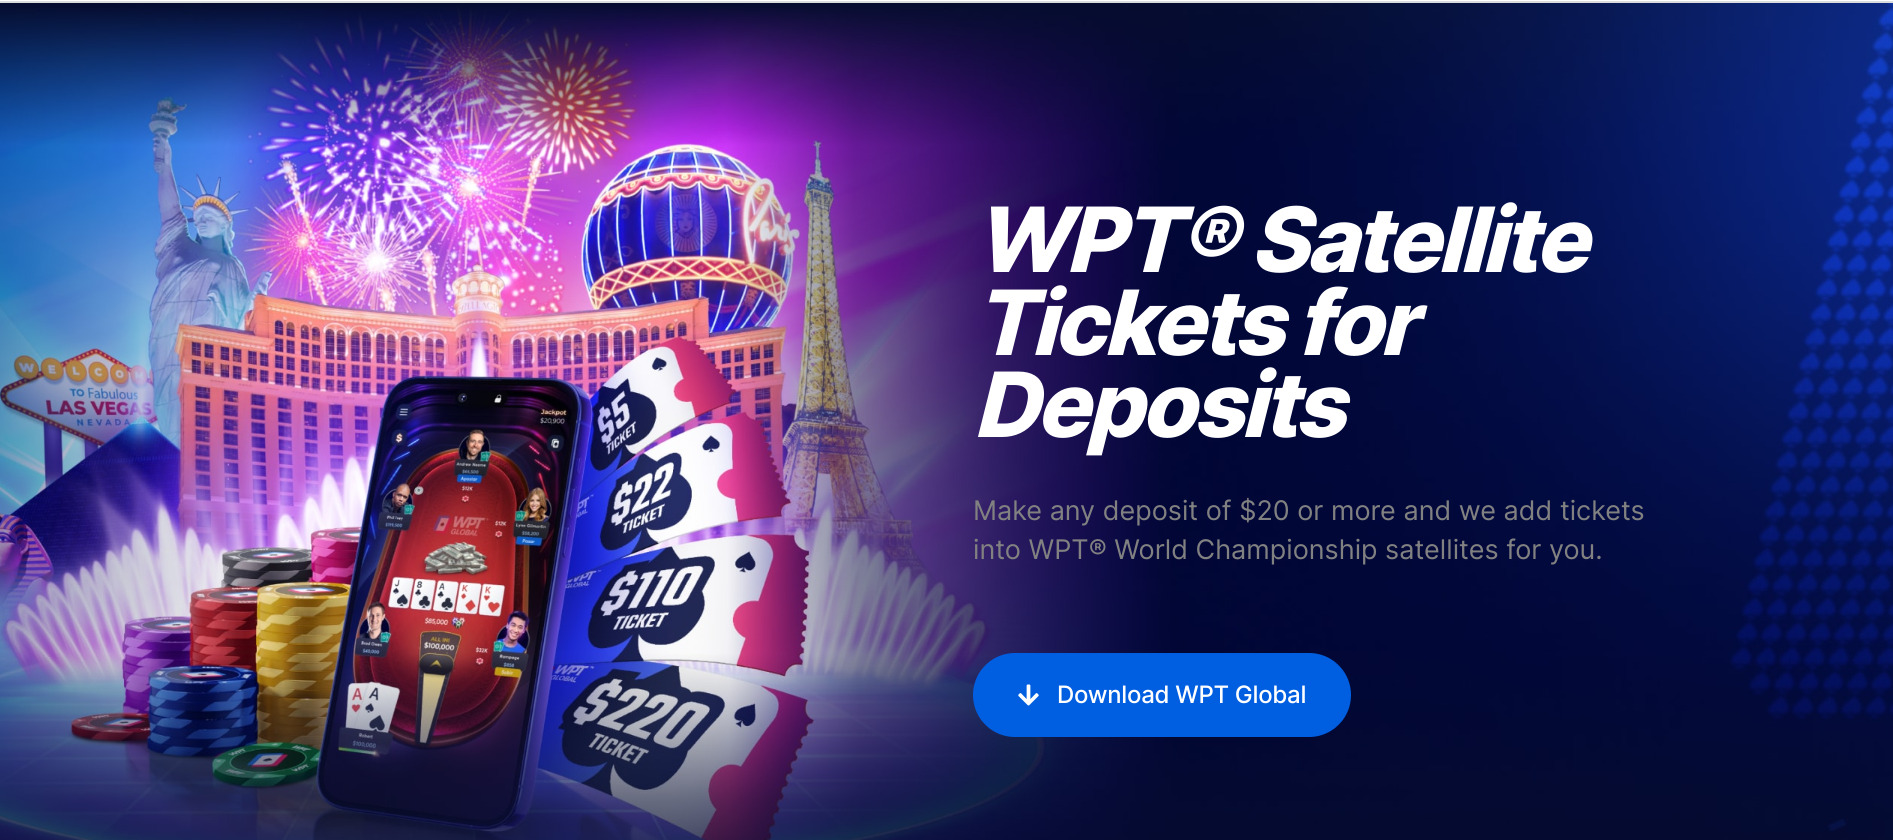 Benefit now from a special WPT Championship Deposit Bonus at WPT Global